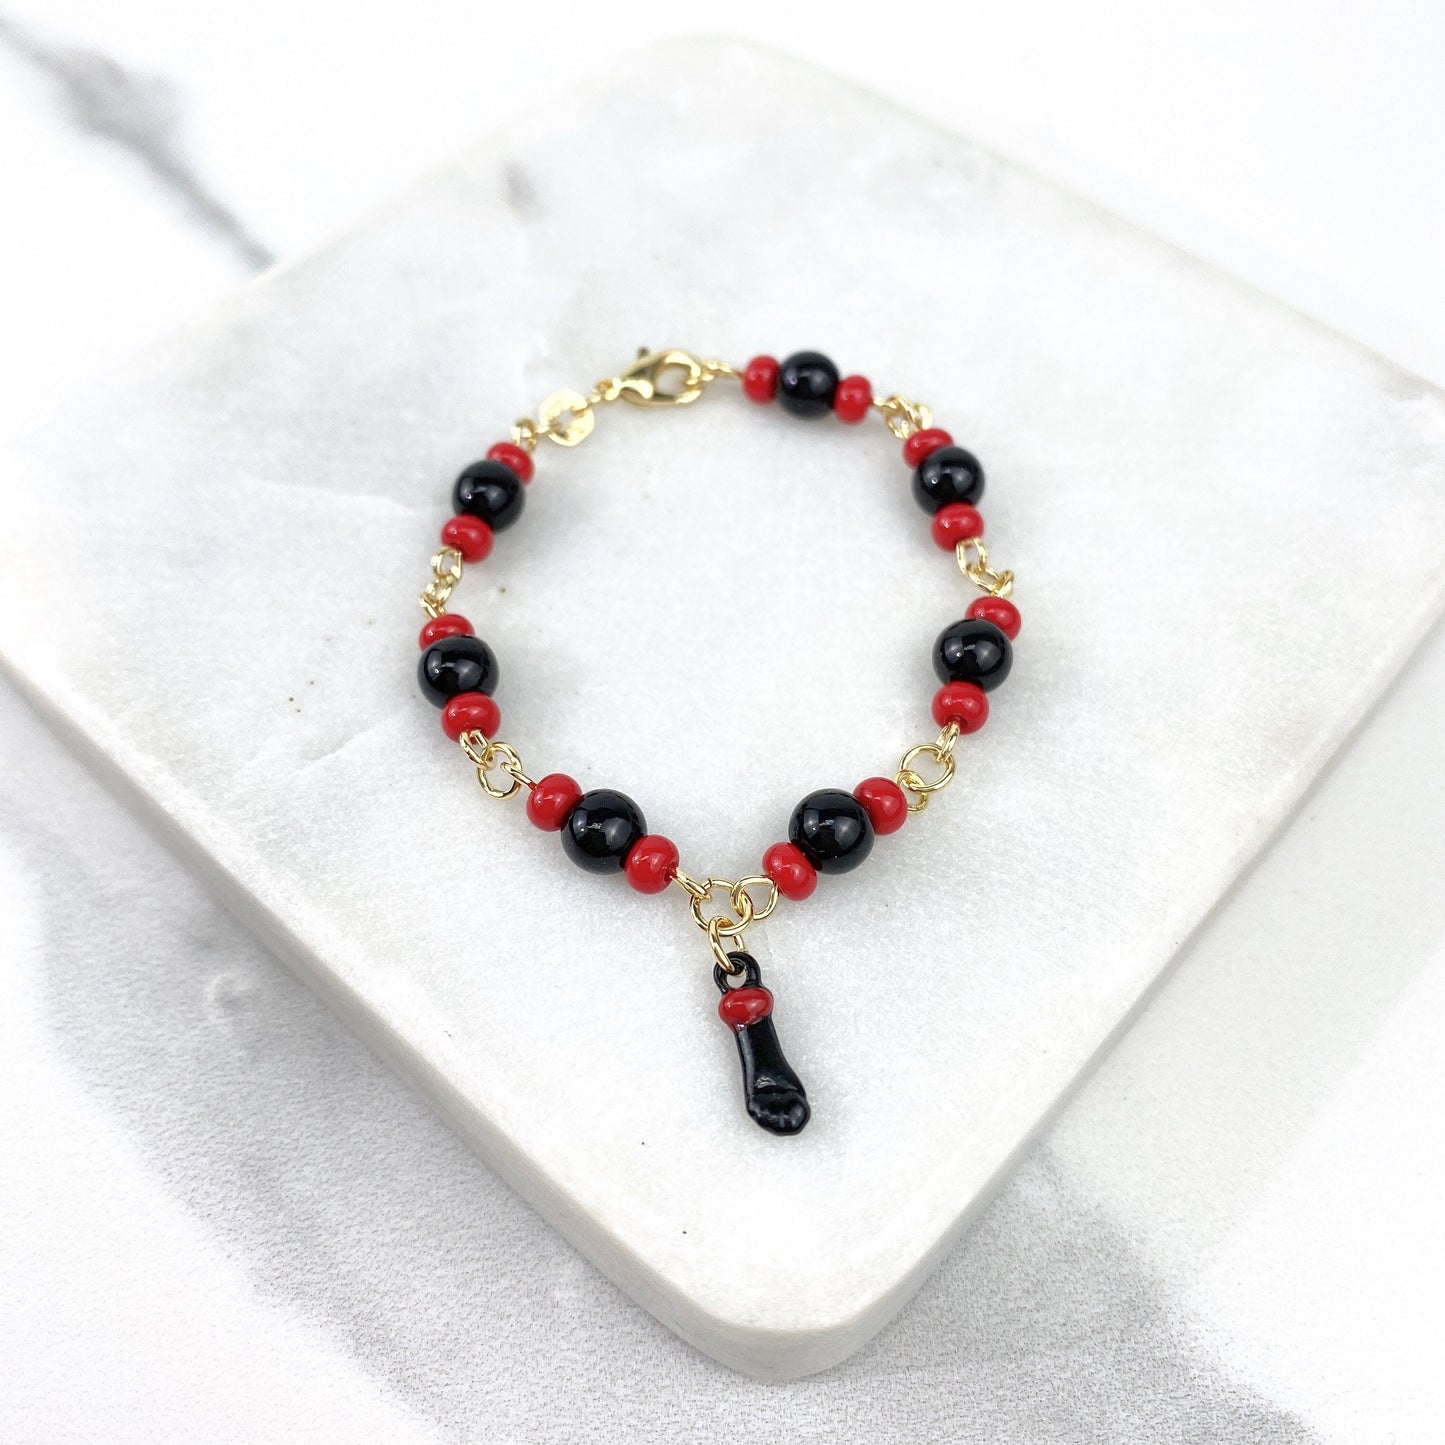 Mommy and Me Matching Jewelry | 18k Gold Filled Black Red Beads, Figa Hand, Kids or Mother Bracelet Wholesale Jewelry Supplies